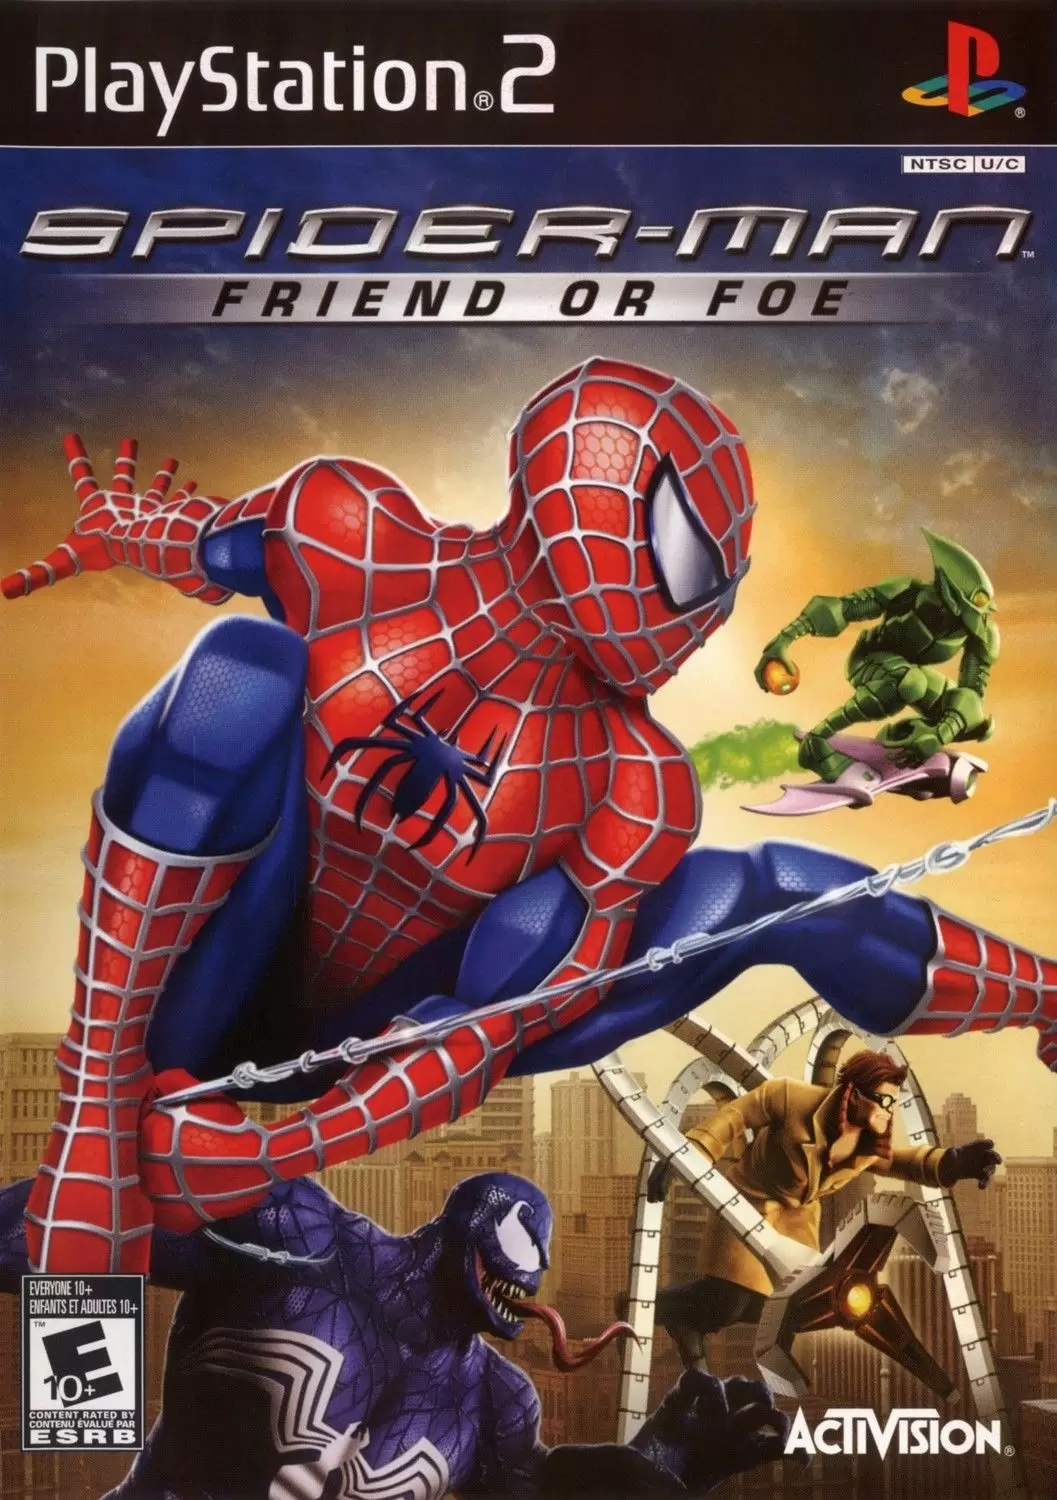 PS2 Games - Spider-Man: Friend or Foe